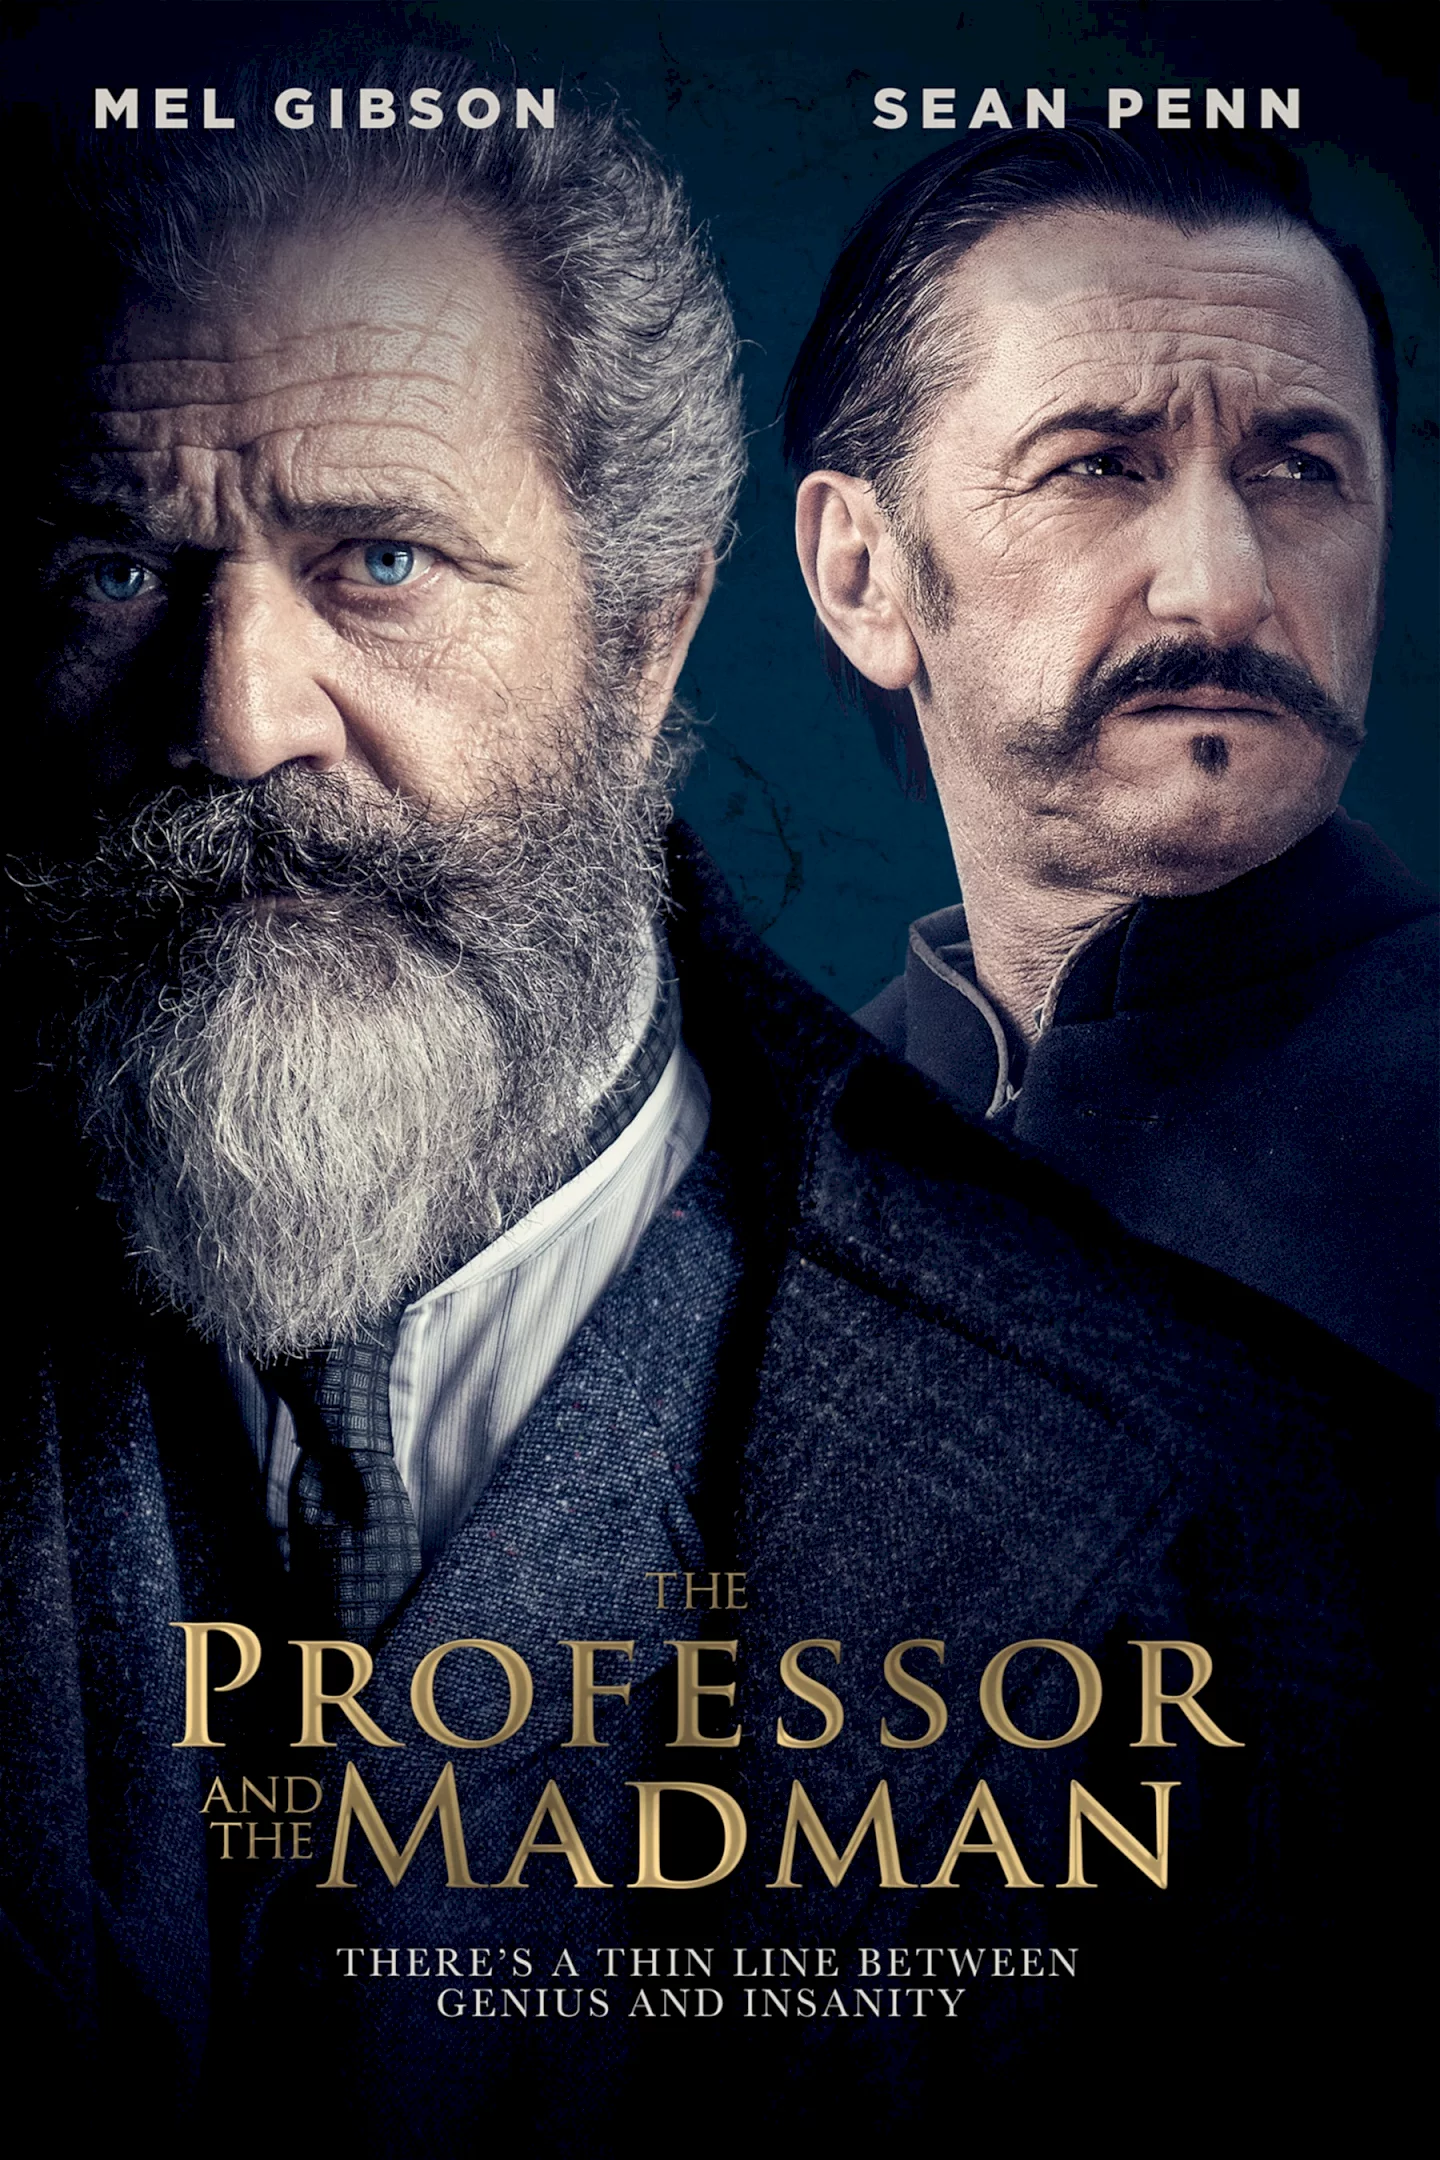 Photo 7 du film : The professor and the madman